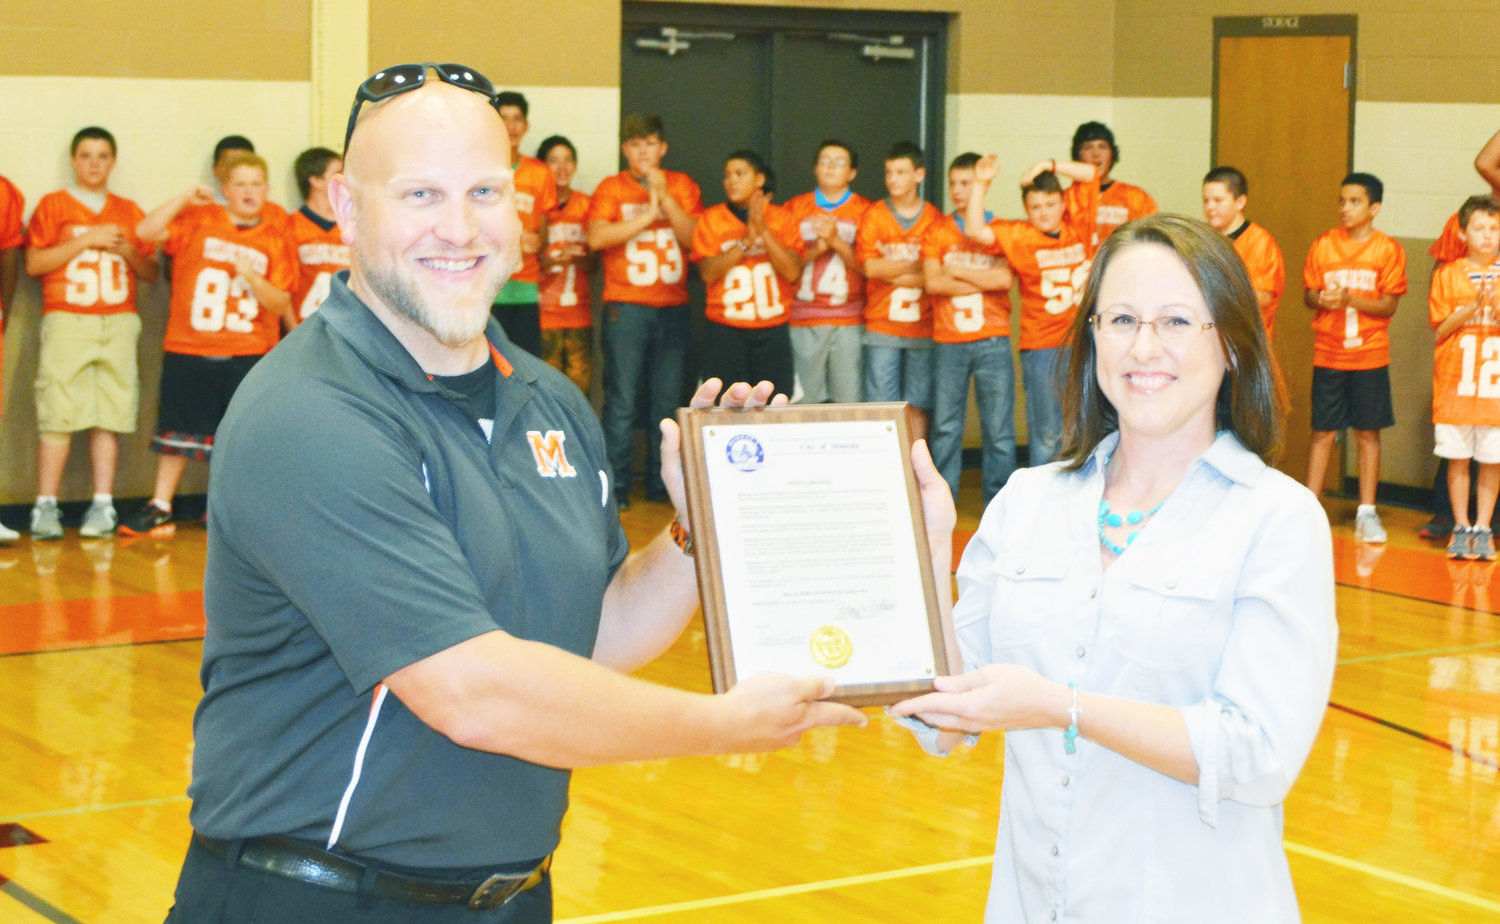 From left, Assistant Band Director-Percussion Specialist James Best accepts an official proclamation by the Mayor of Mineola from Mineola City Secretary Cynthia Karch, recognizing the middle school band and their accomplishment as UIL State Honor Band.